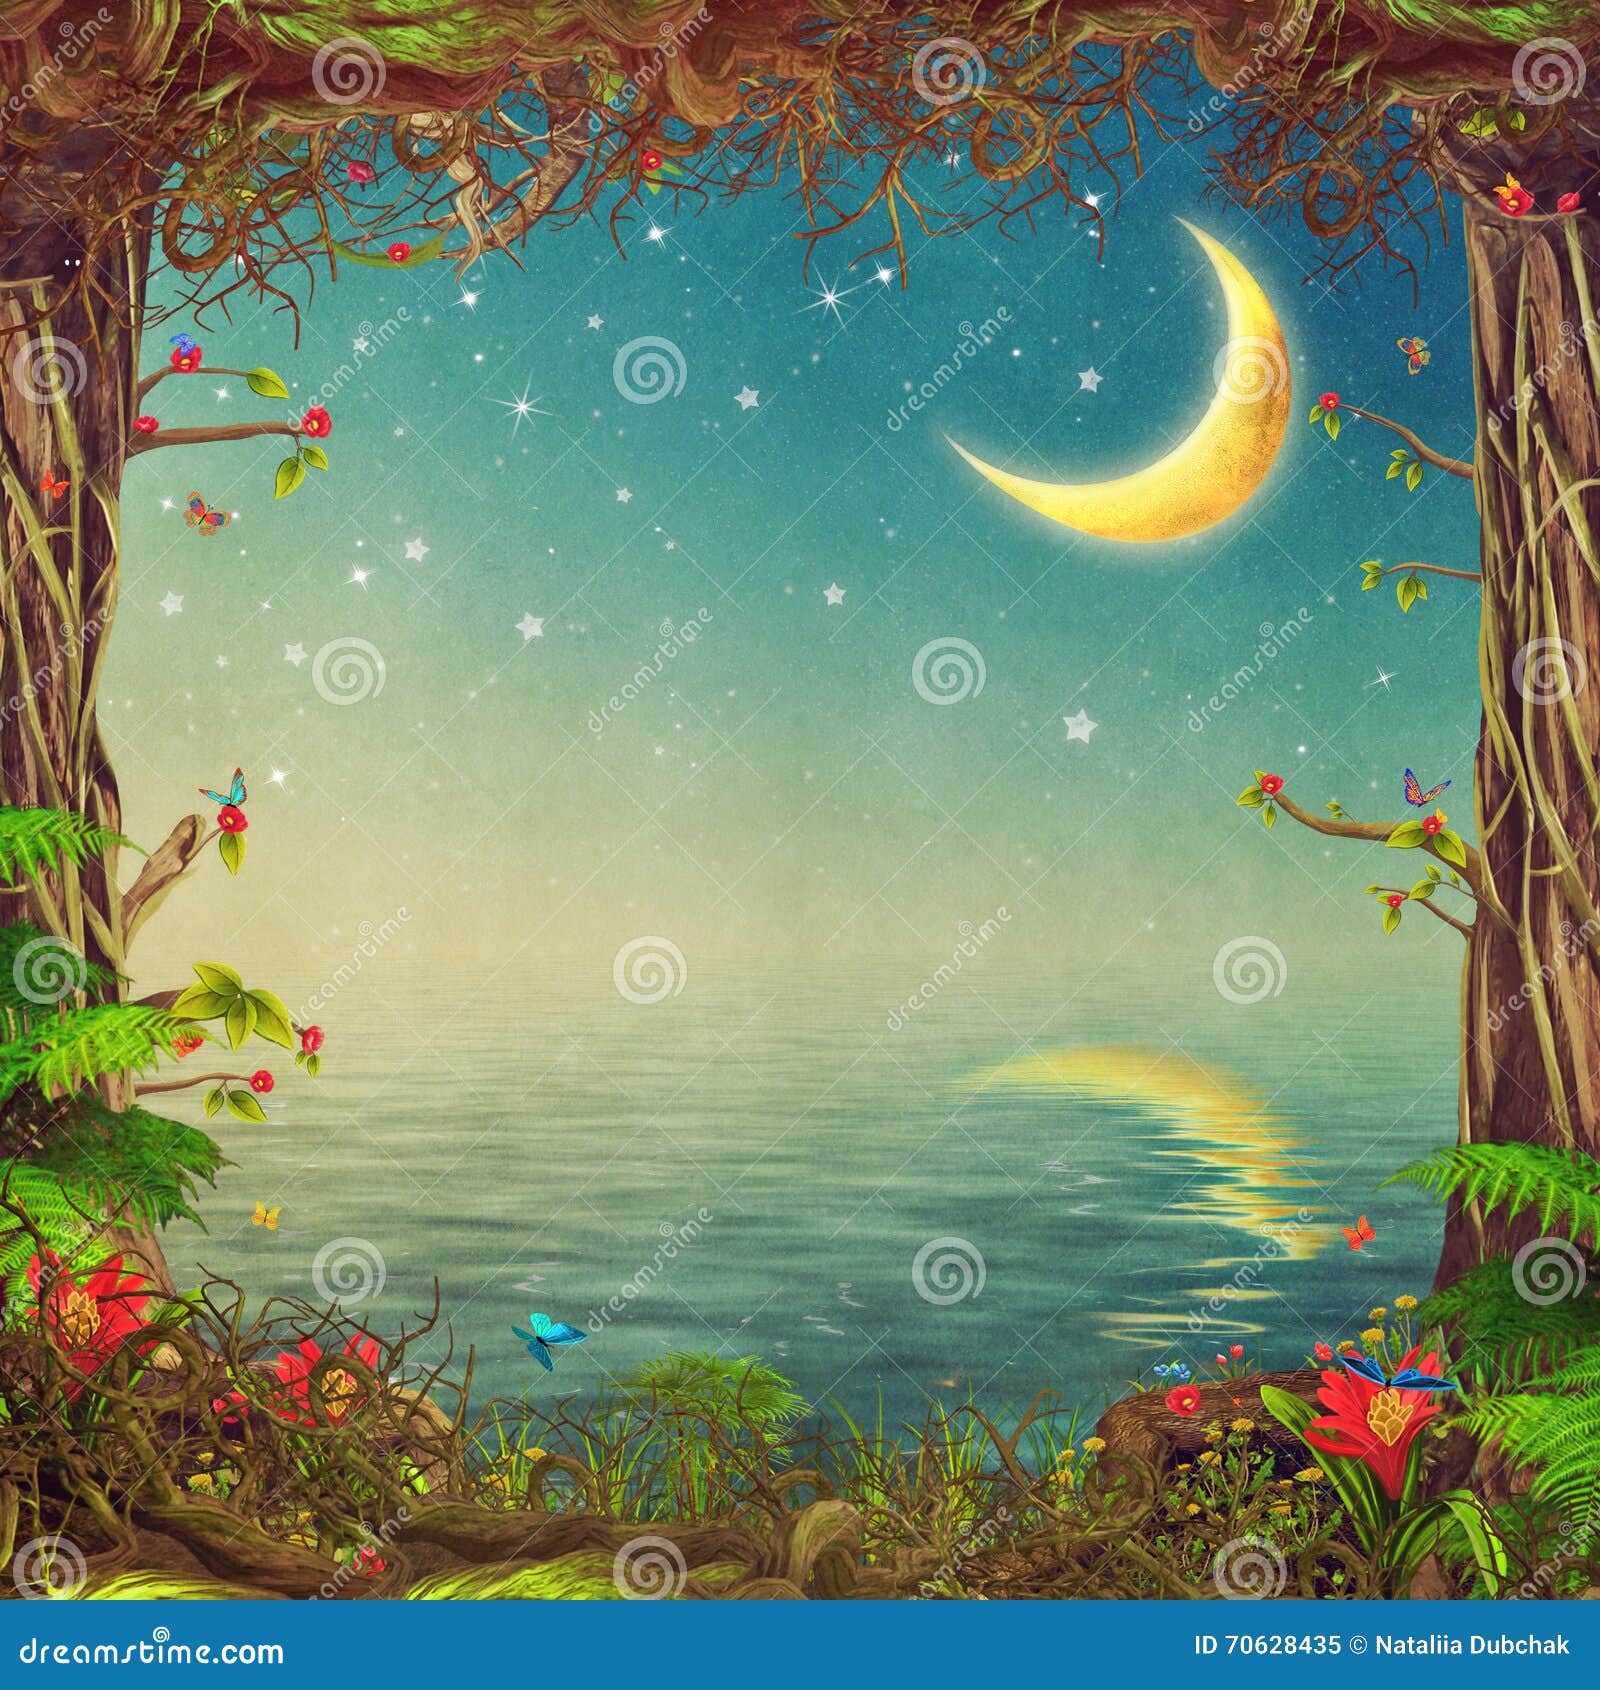 beautiful woodland scene with trees ,sky and moon over the sea